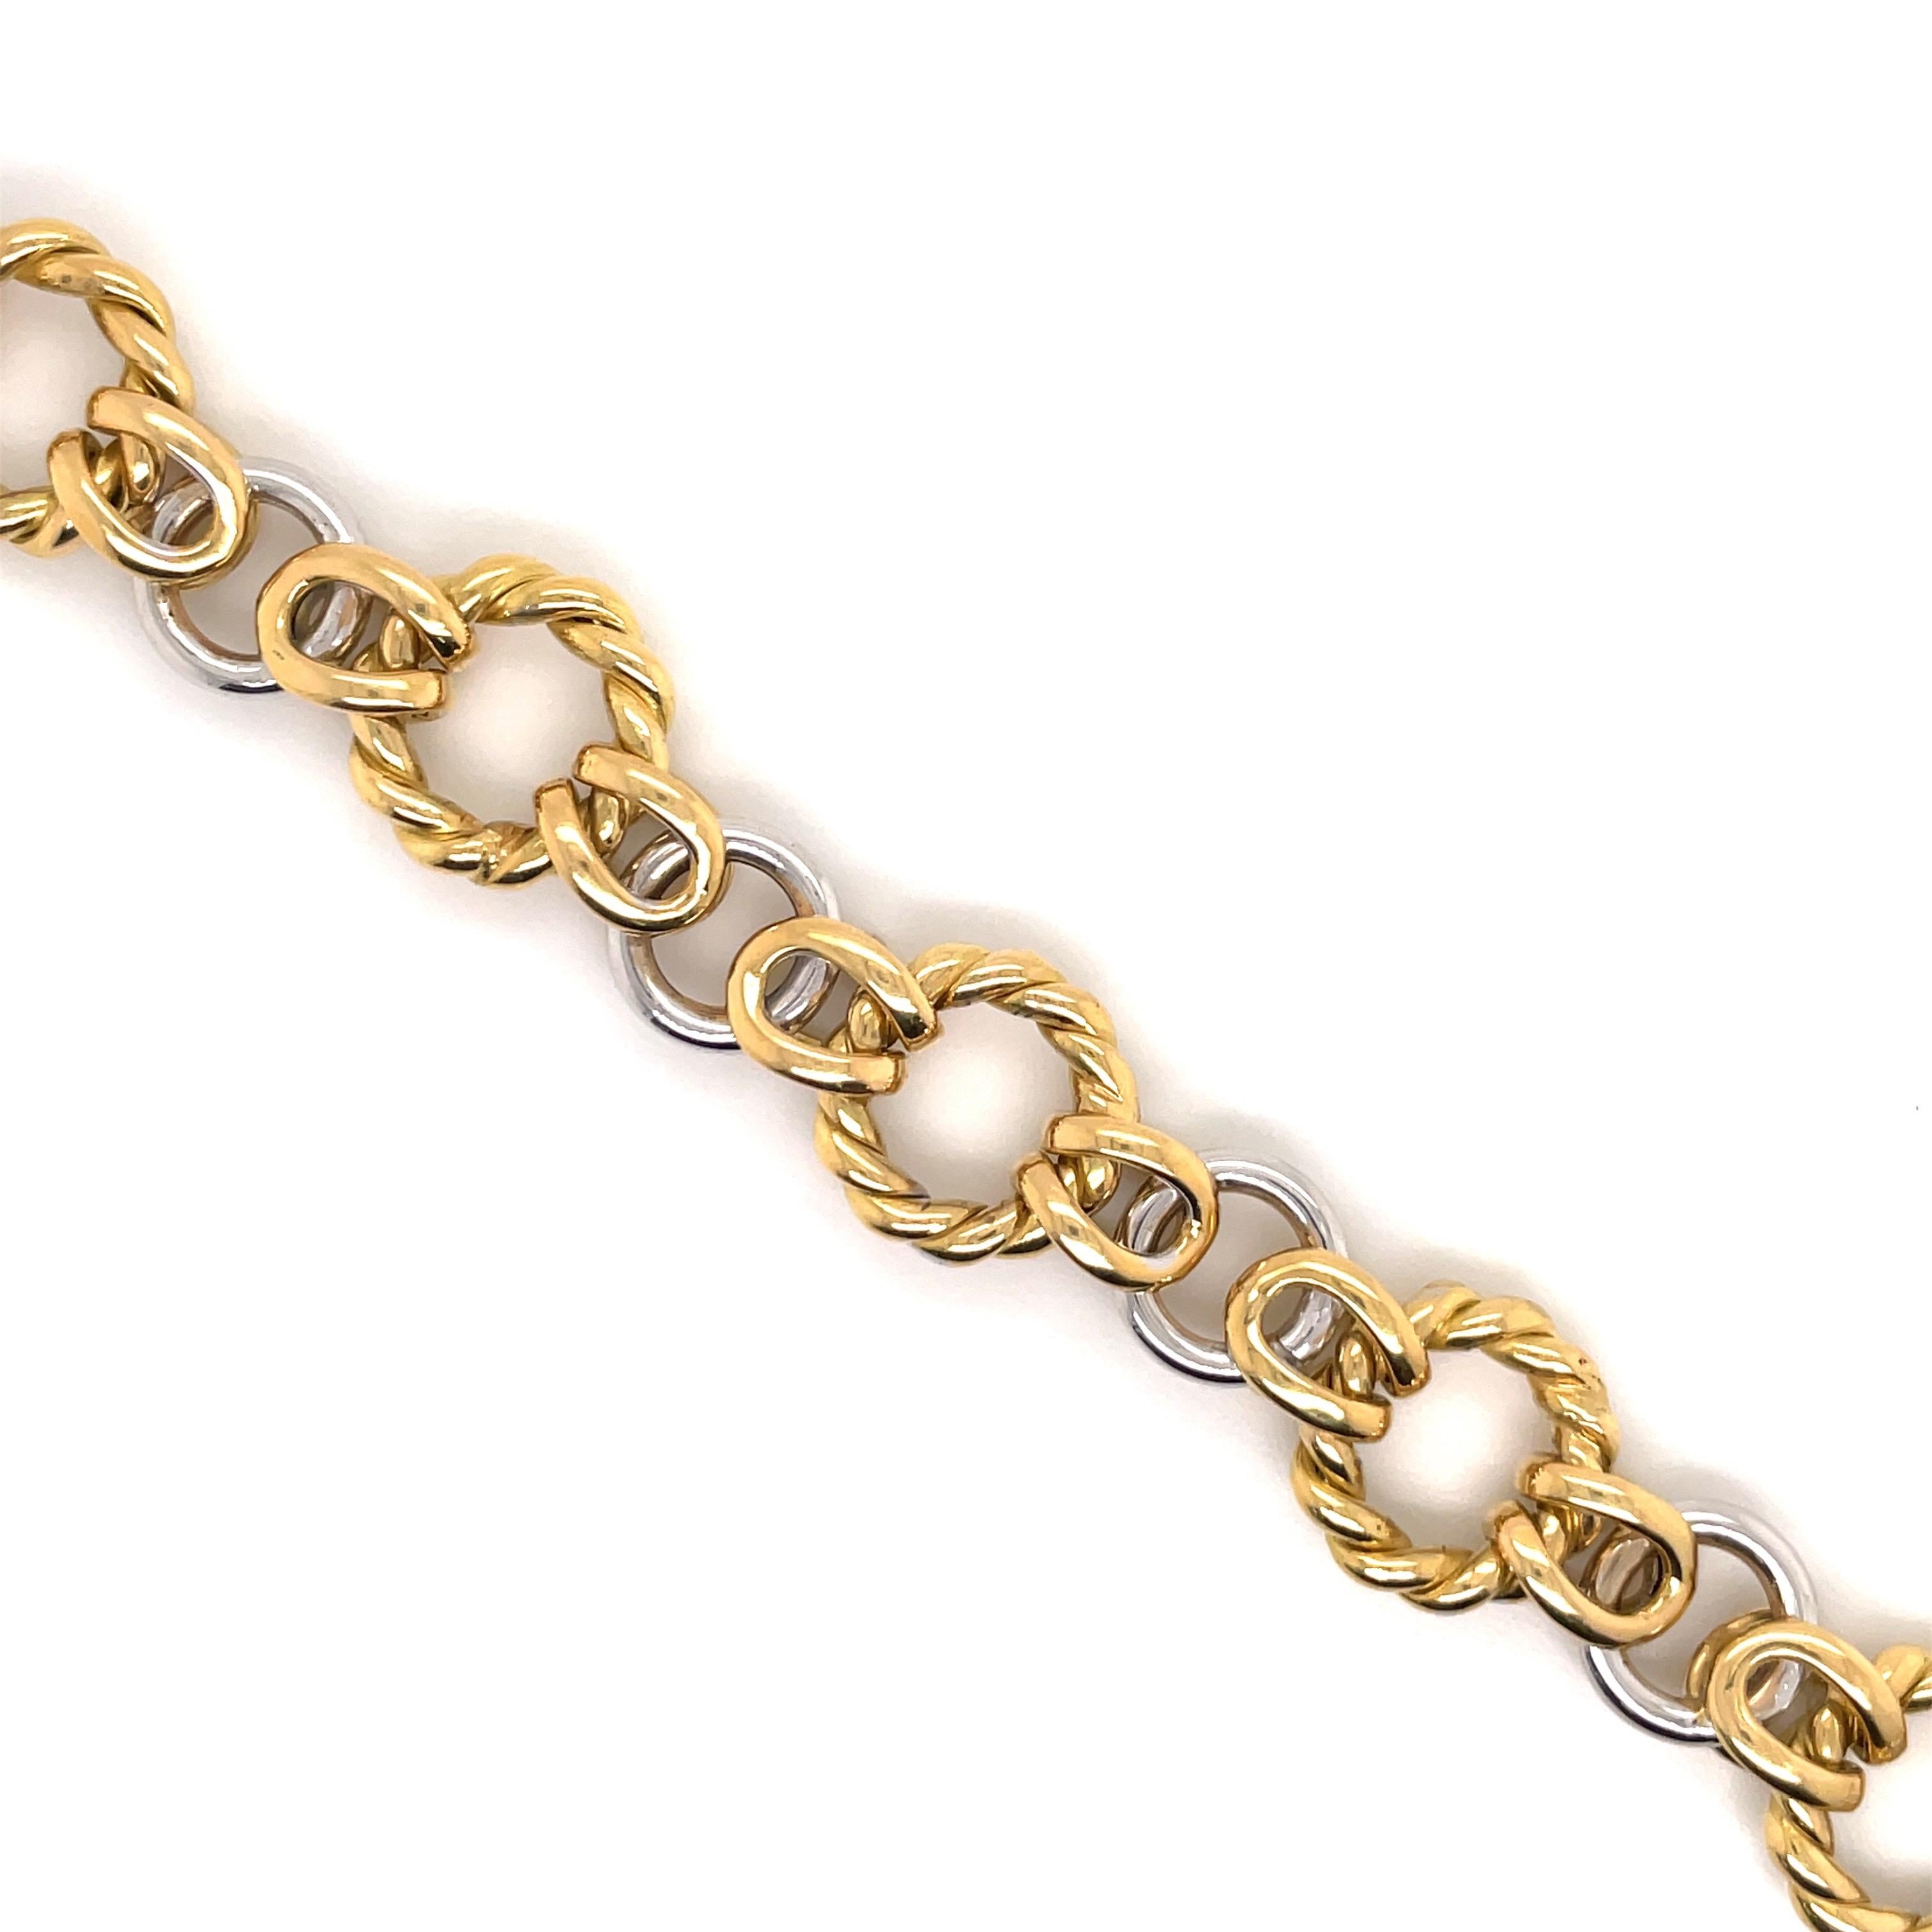 18 Karat yellow & white gold bracelet featuring 13 round links weighing 20.8 grams. Made In Italy. 
Great for stacking!
More Link Bracelets Available.